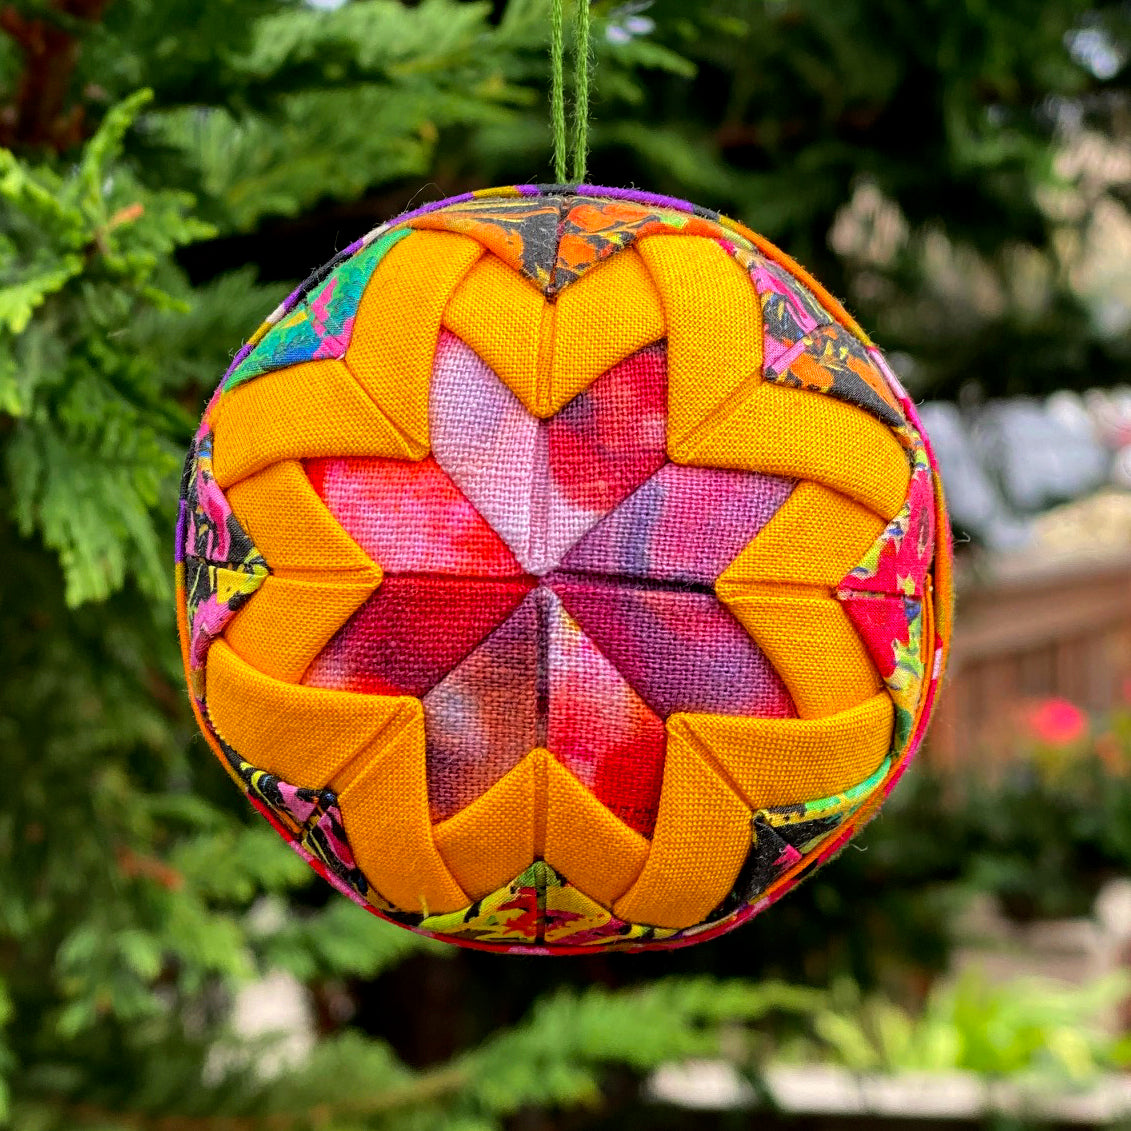 Book Your Own Private Quilted Ball Workshop